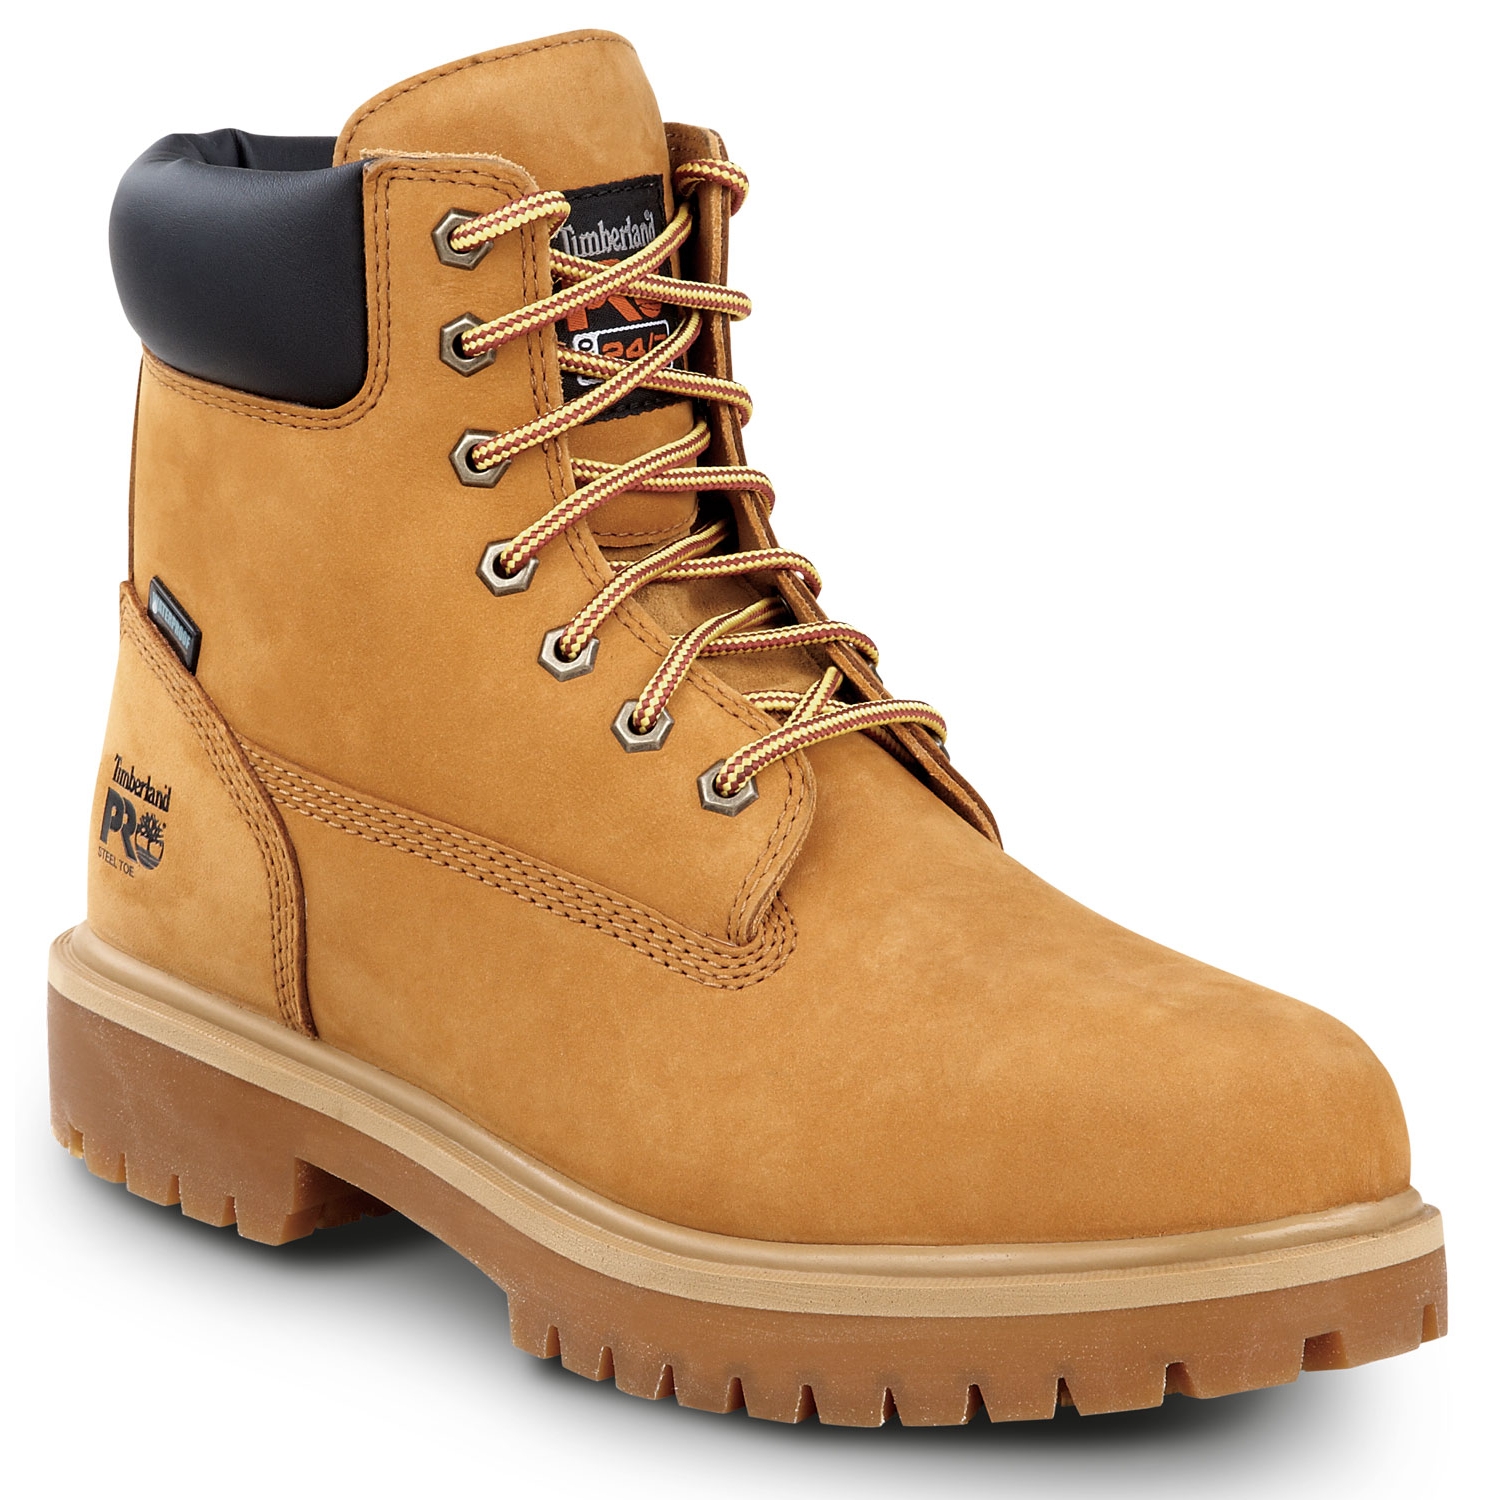 rag Believer Blame SR Max | STMA1W6B Timberland PRO 6IN Direct Attach Men's Steel Toe Boot